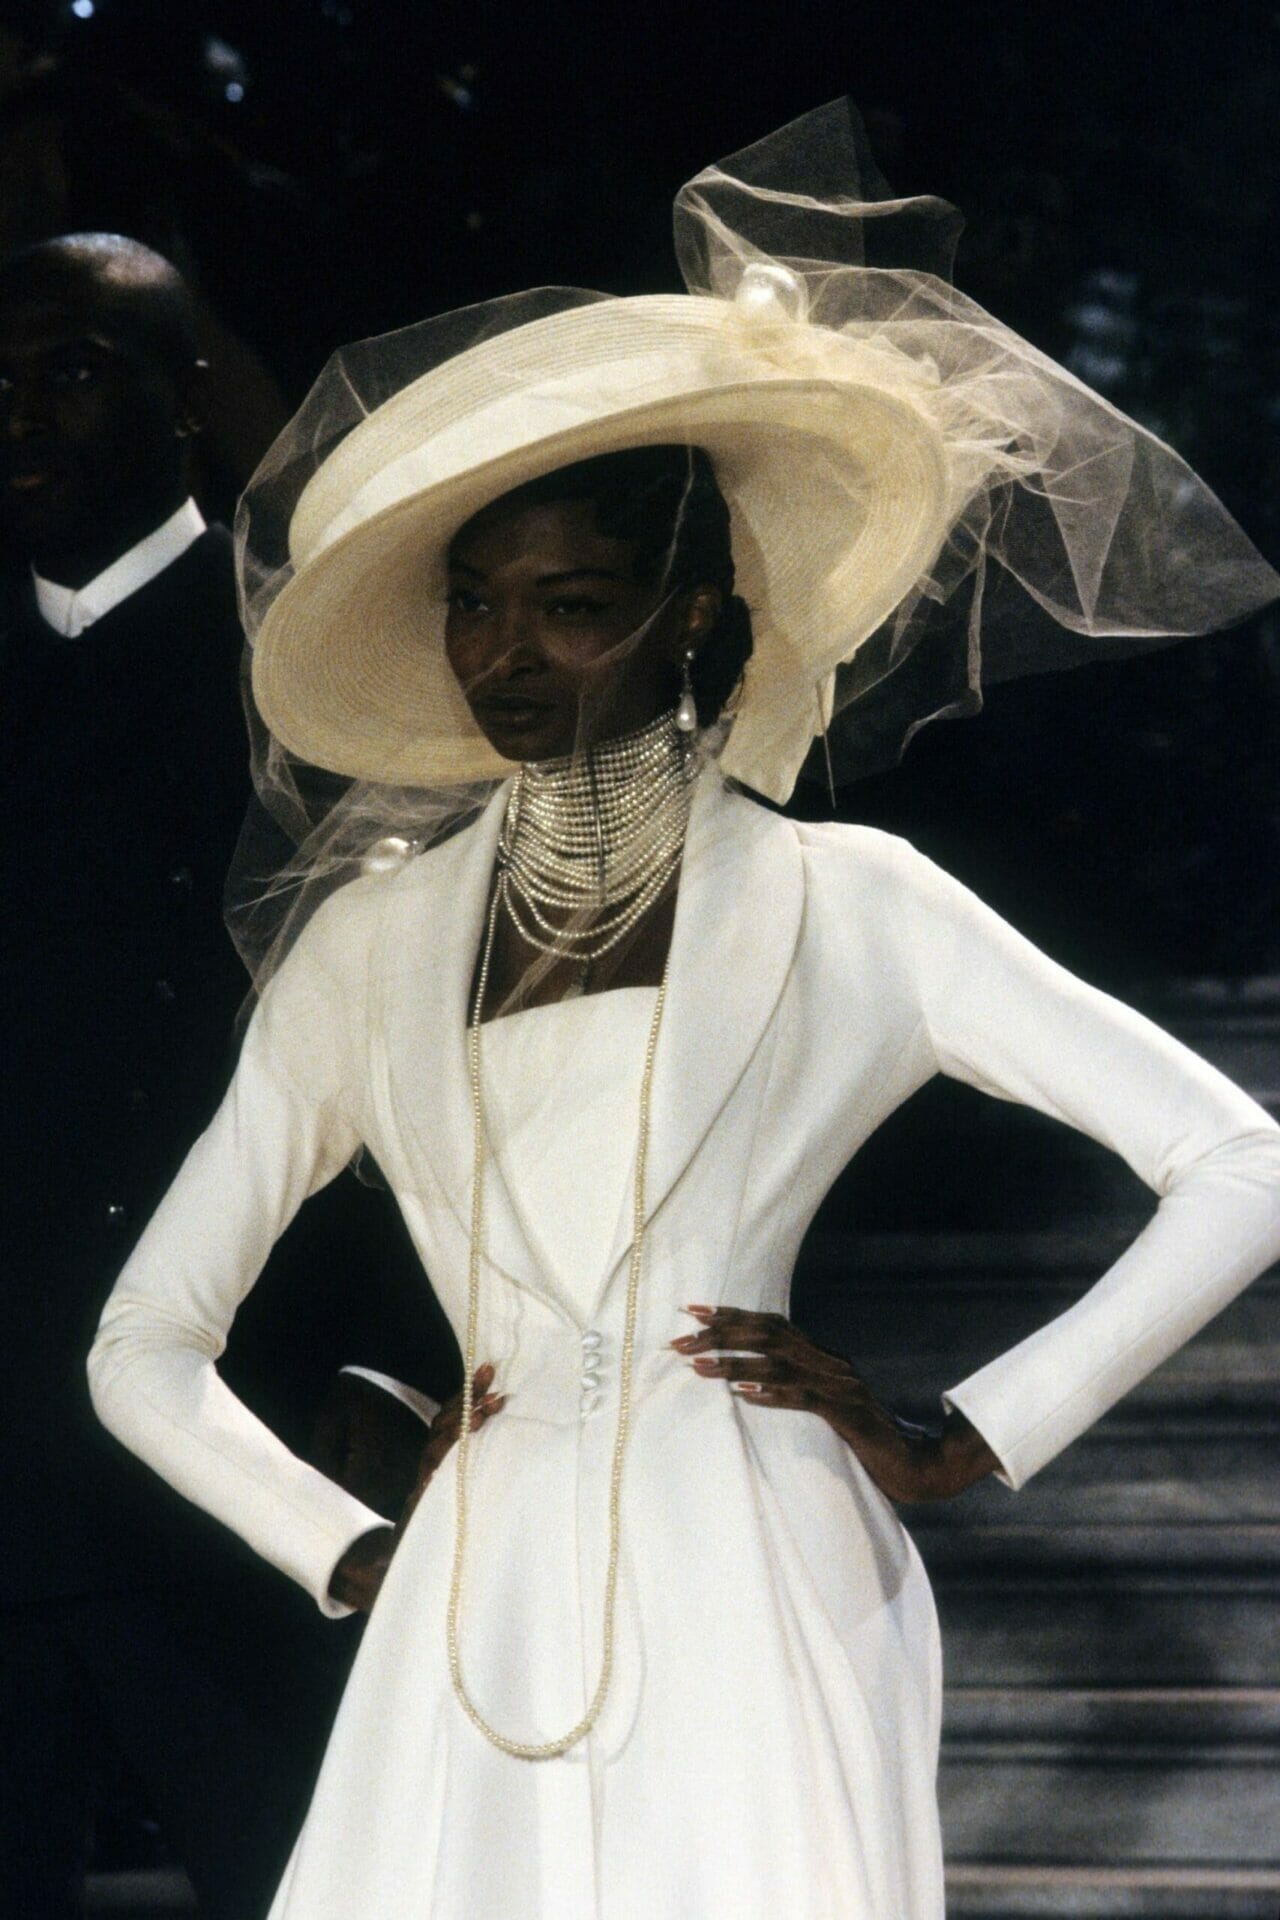 JOHN GALLIANO for CHRISTIAN DIOR HAUTE COUTURE SPRING-SUMMER 1998. RUNWAY MAGAZINE ® Collections Special Selection “Fashion Treasure”. RUNWAY MAGAZINE ® Collections. RUNWAY NOW / RUNWAY NEW